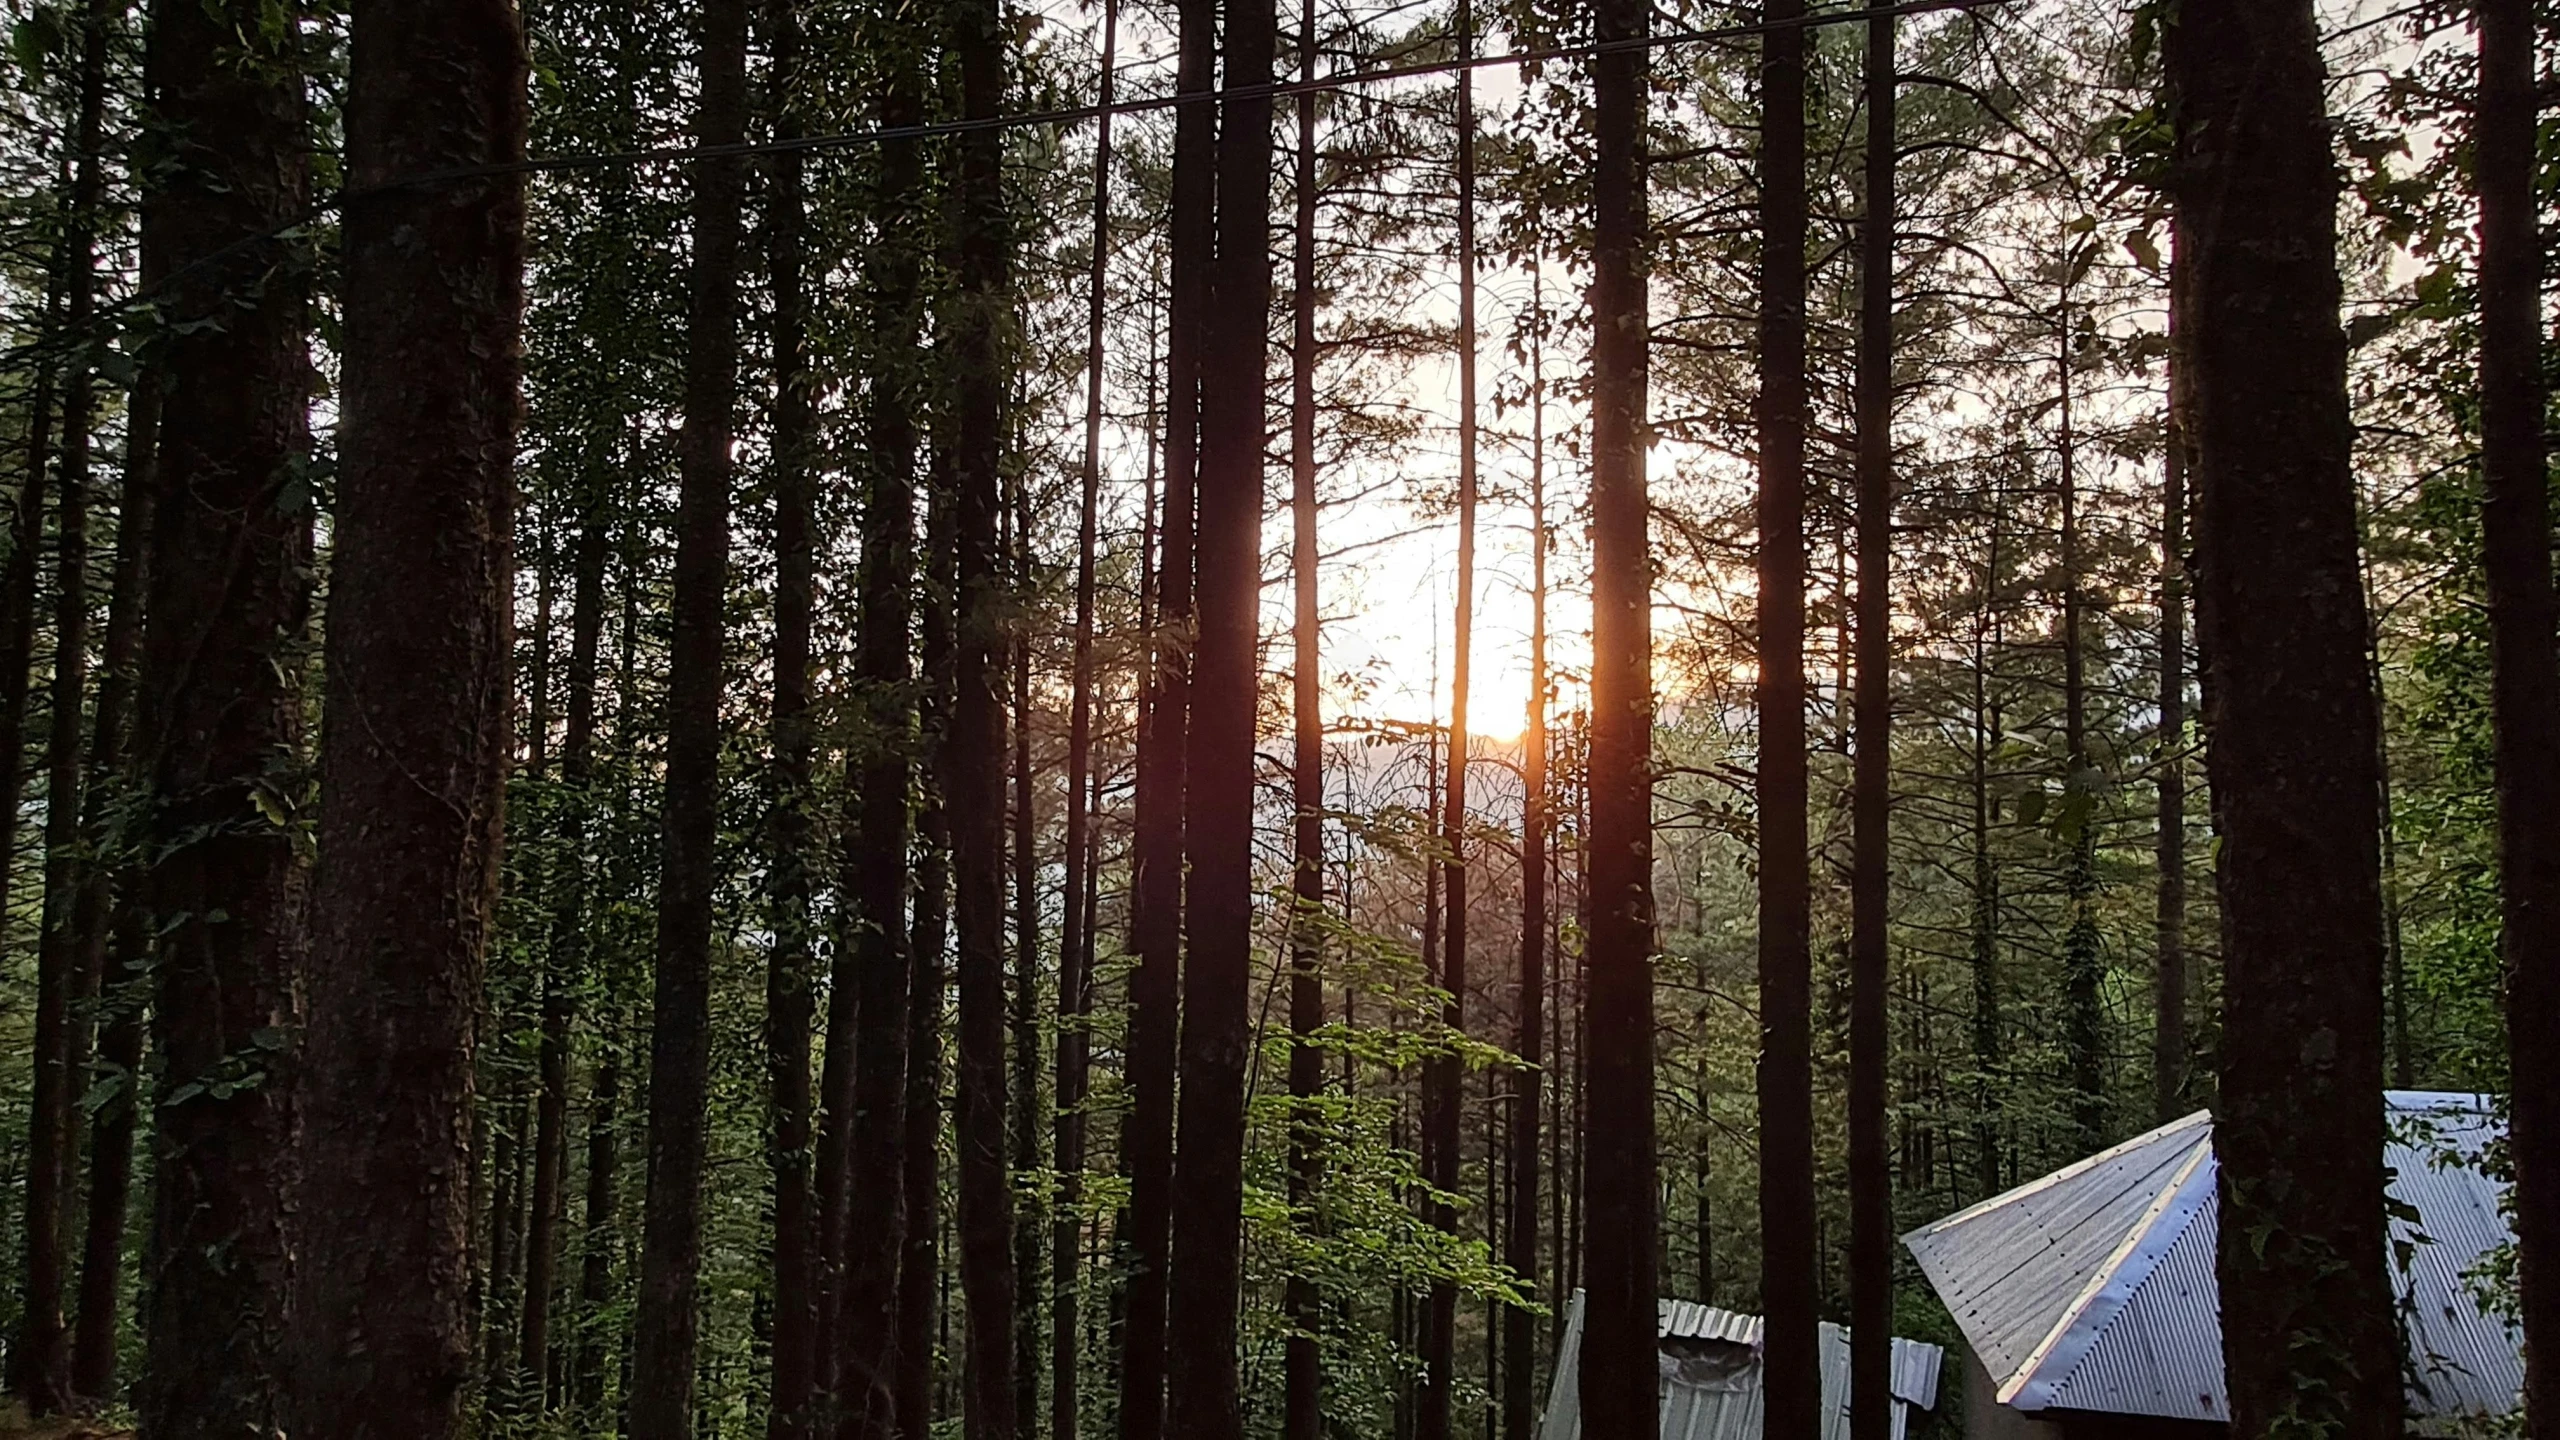 the sun is setting through some tall trees